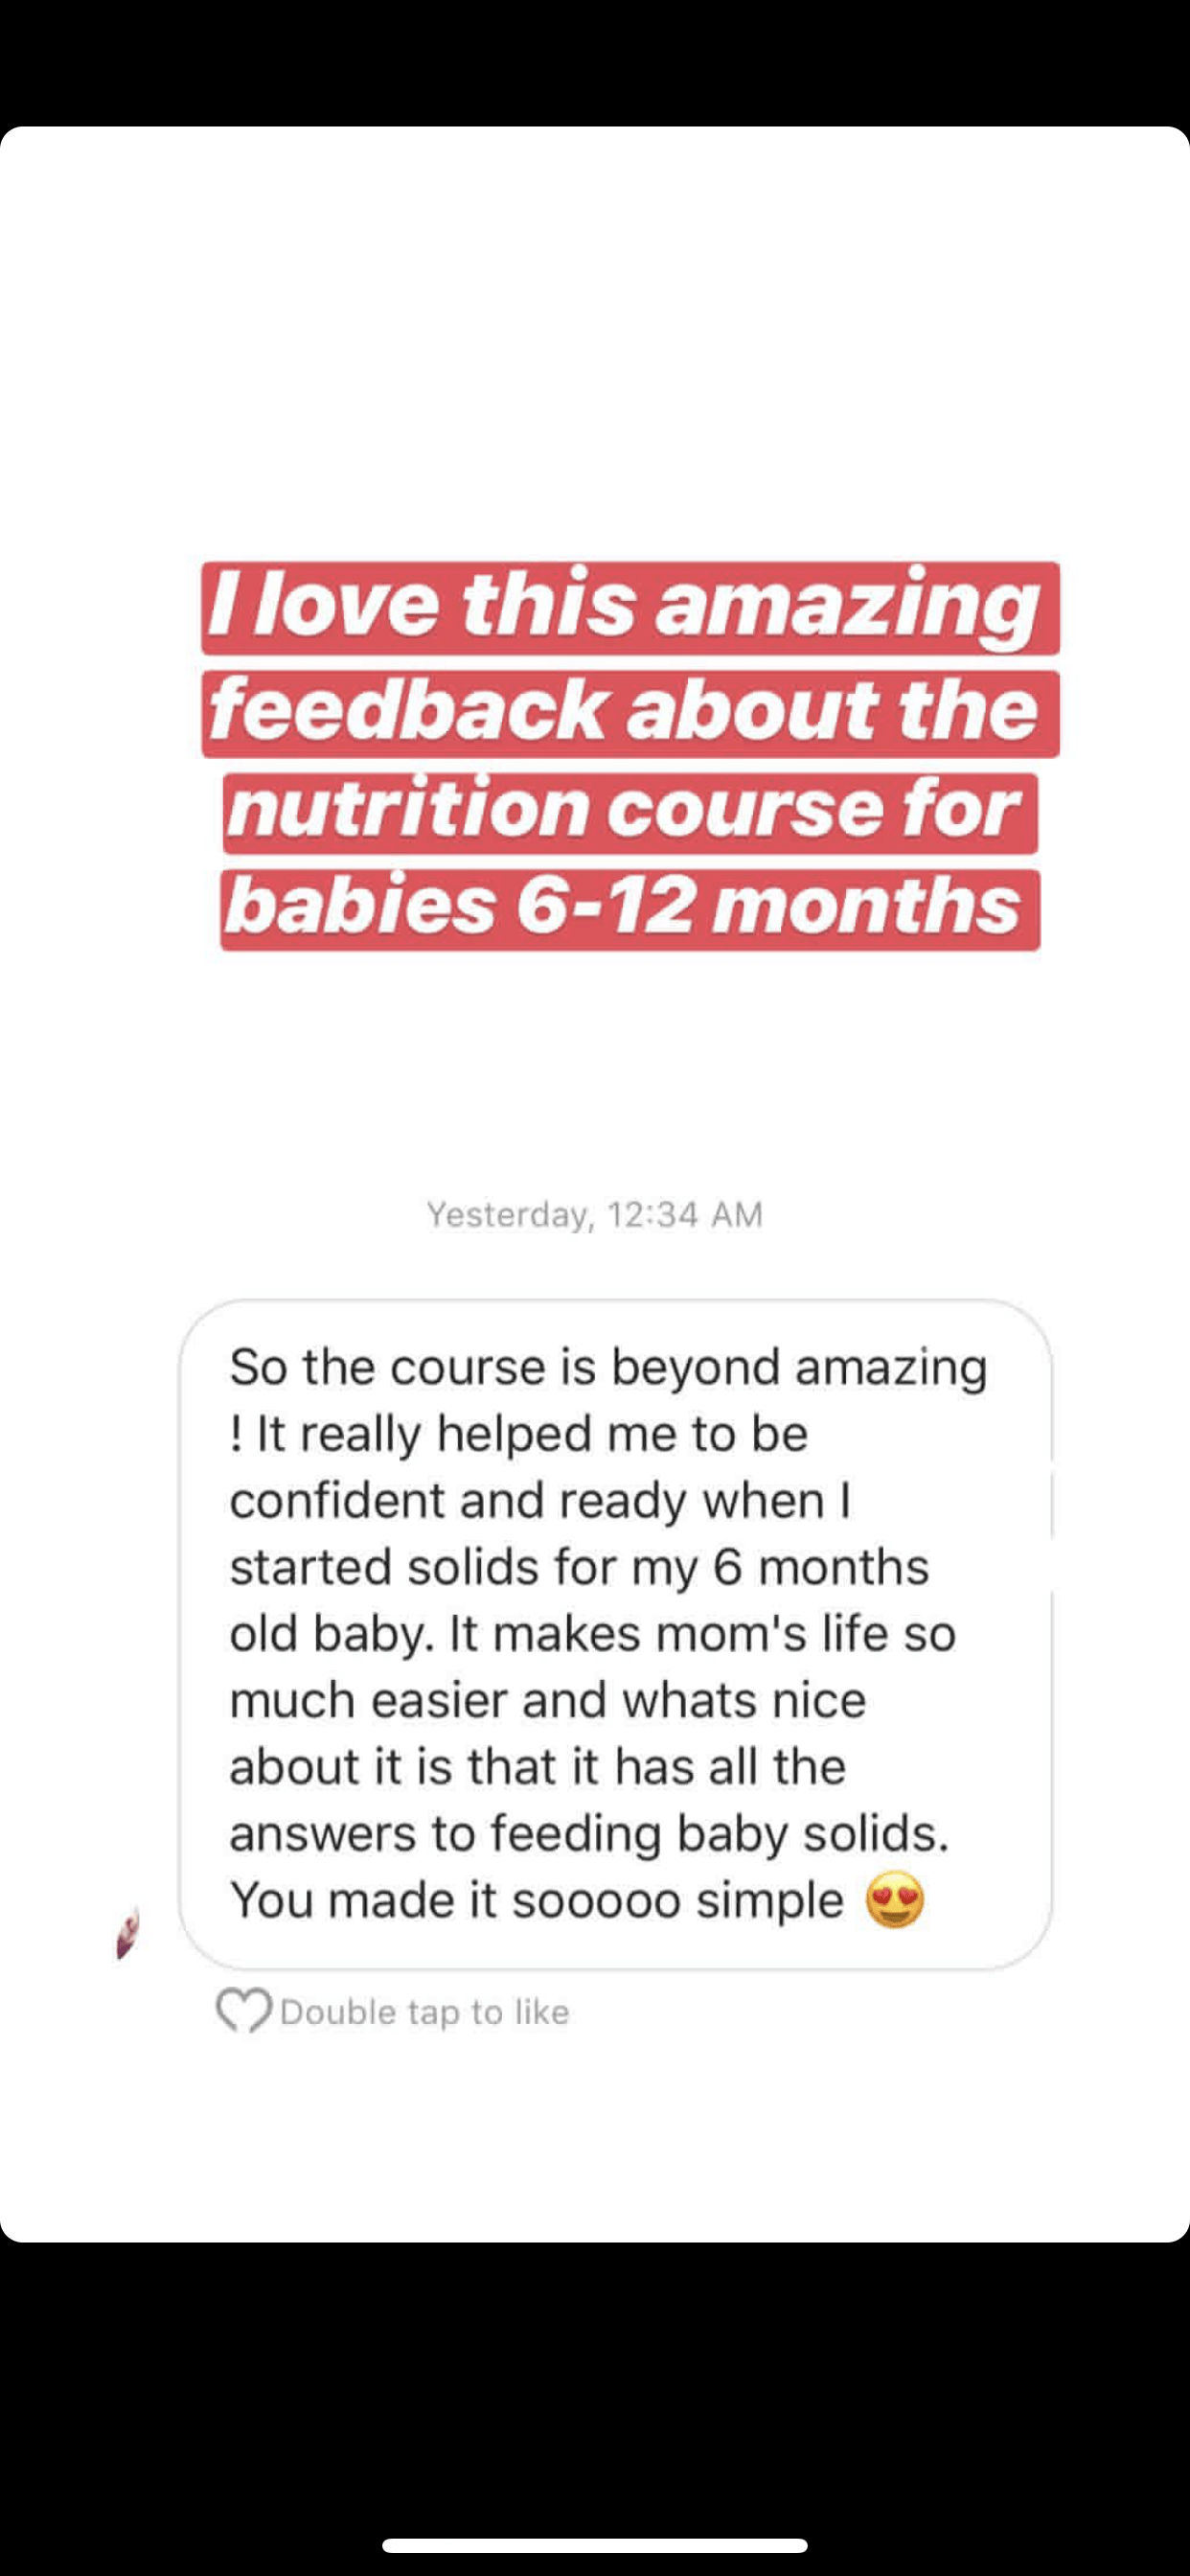 6 - 12 Months - Starting Solid Nutrition - Arabic Version - mirnaelsabbagh - Best Nutritionist in Dubai and Middle East - Mommy and health influencer in dubai and Middle East 